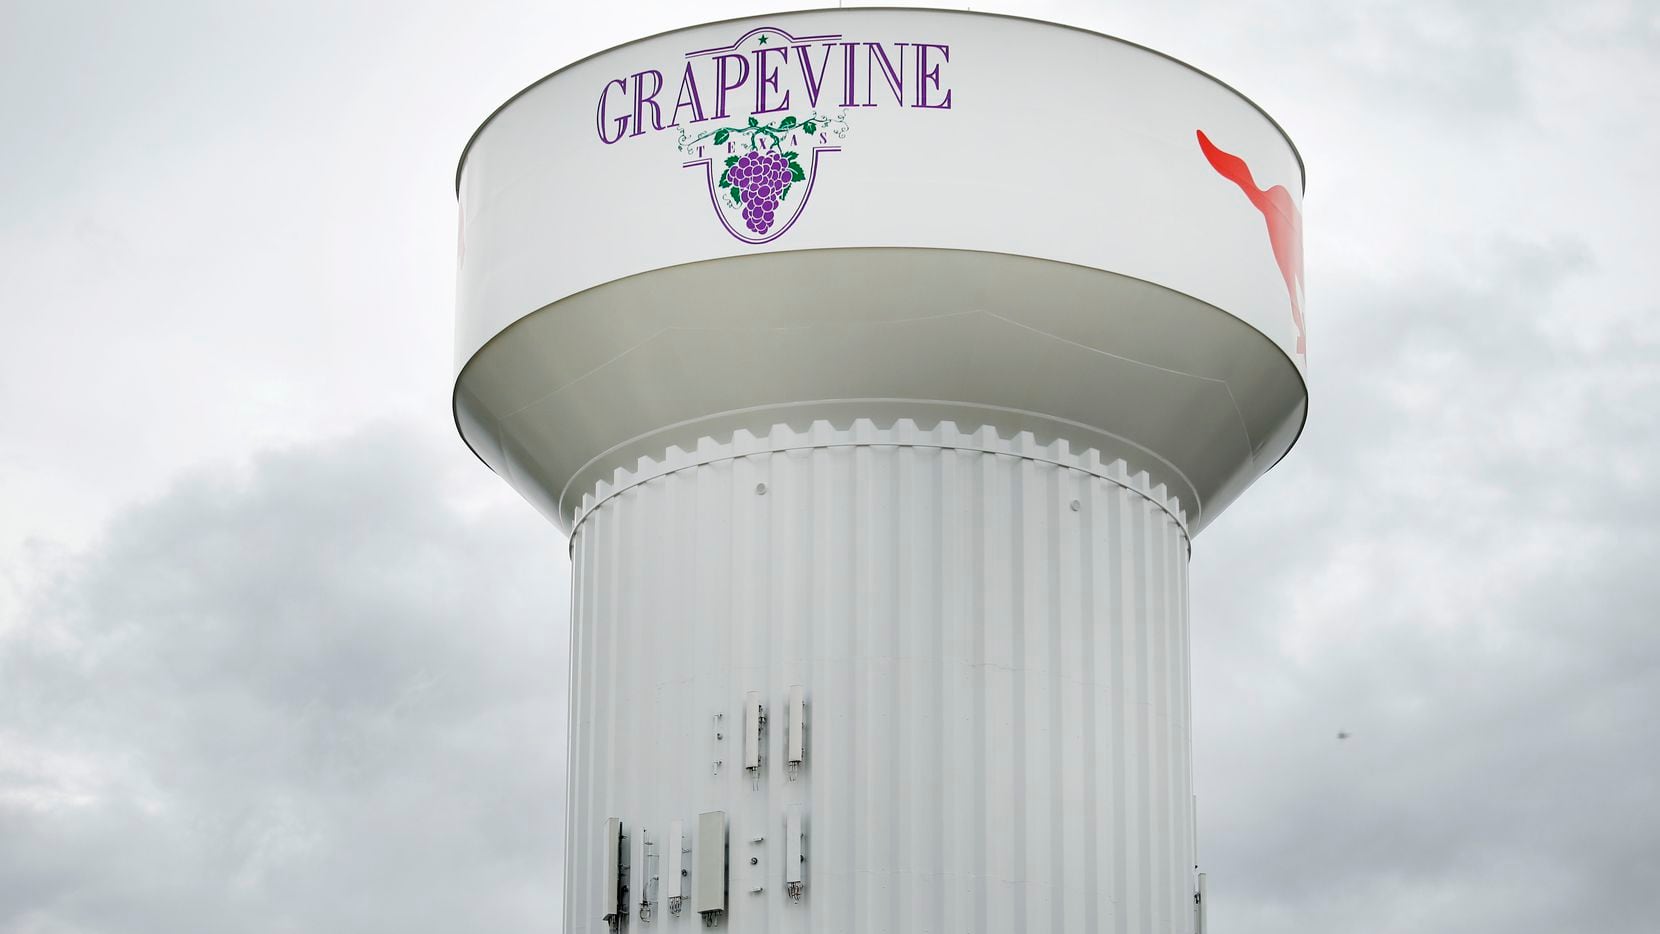 Two former Grapevine employees used city funds for personal use, according to a report in...